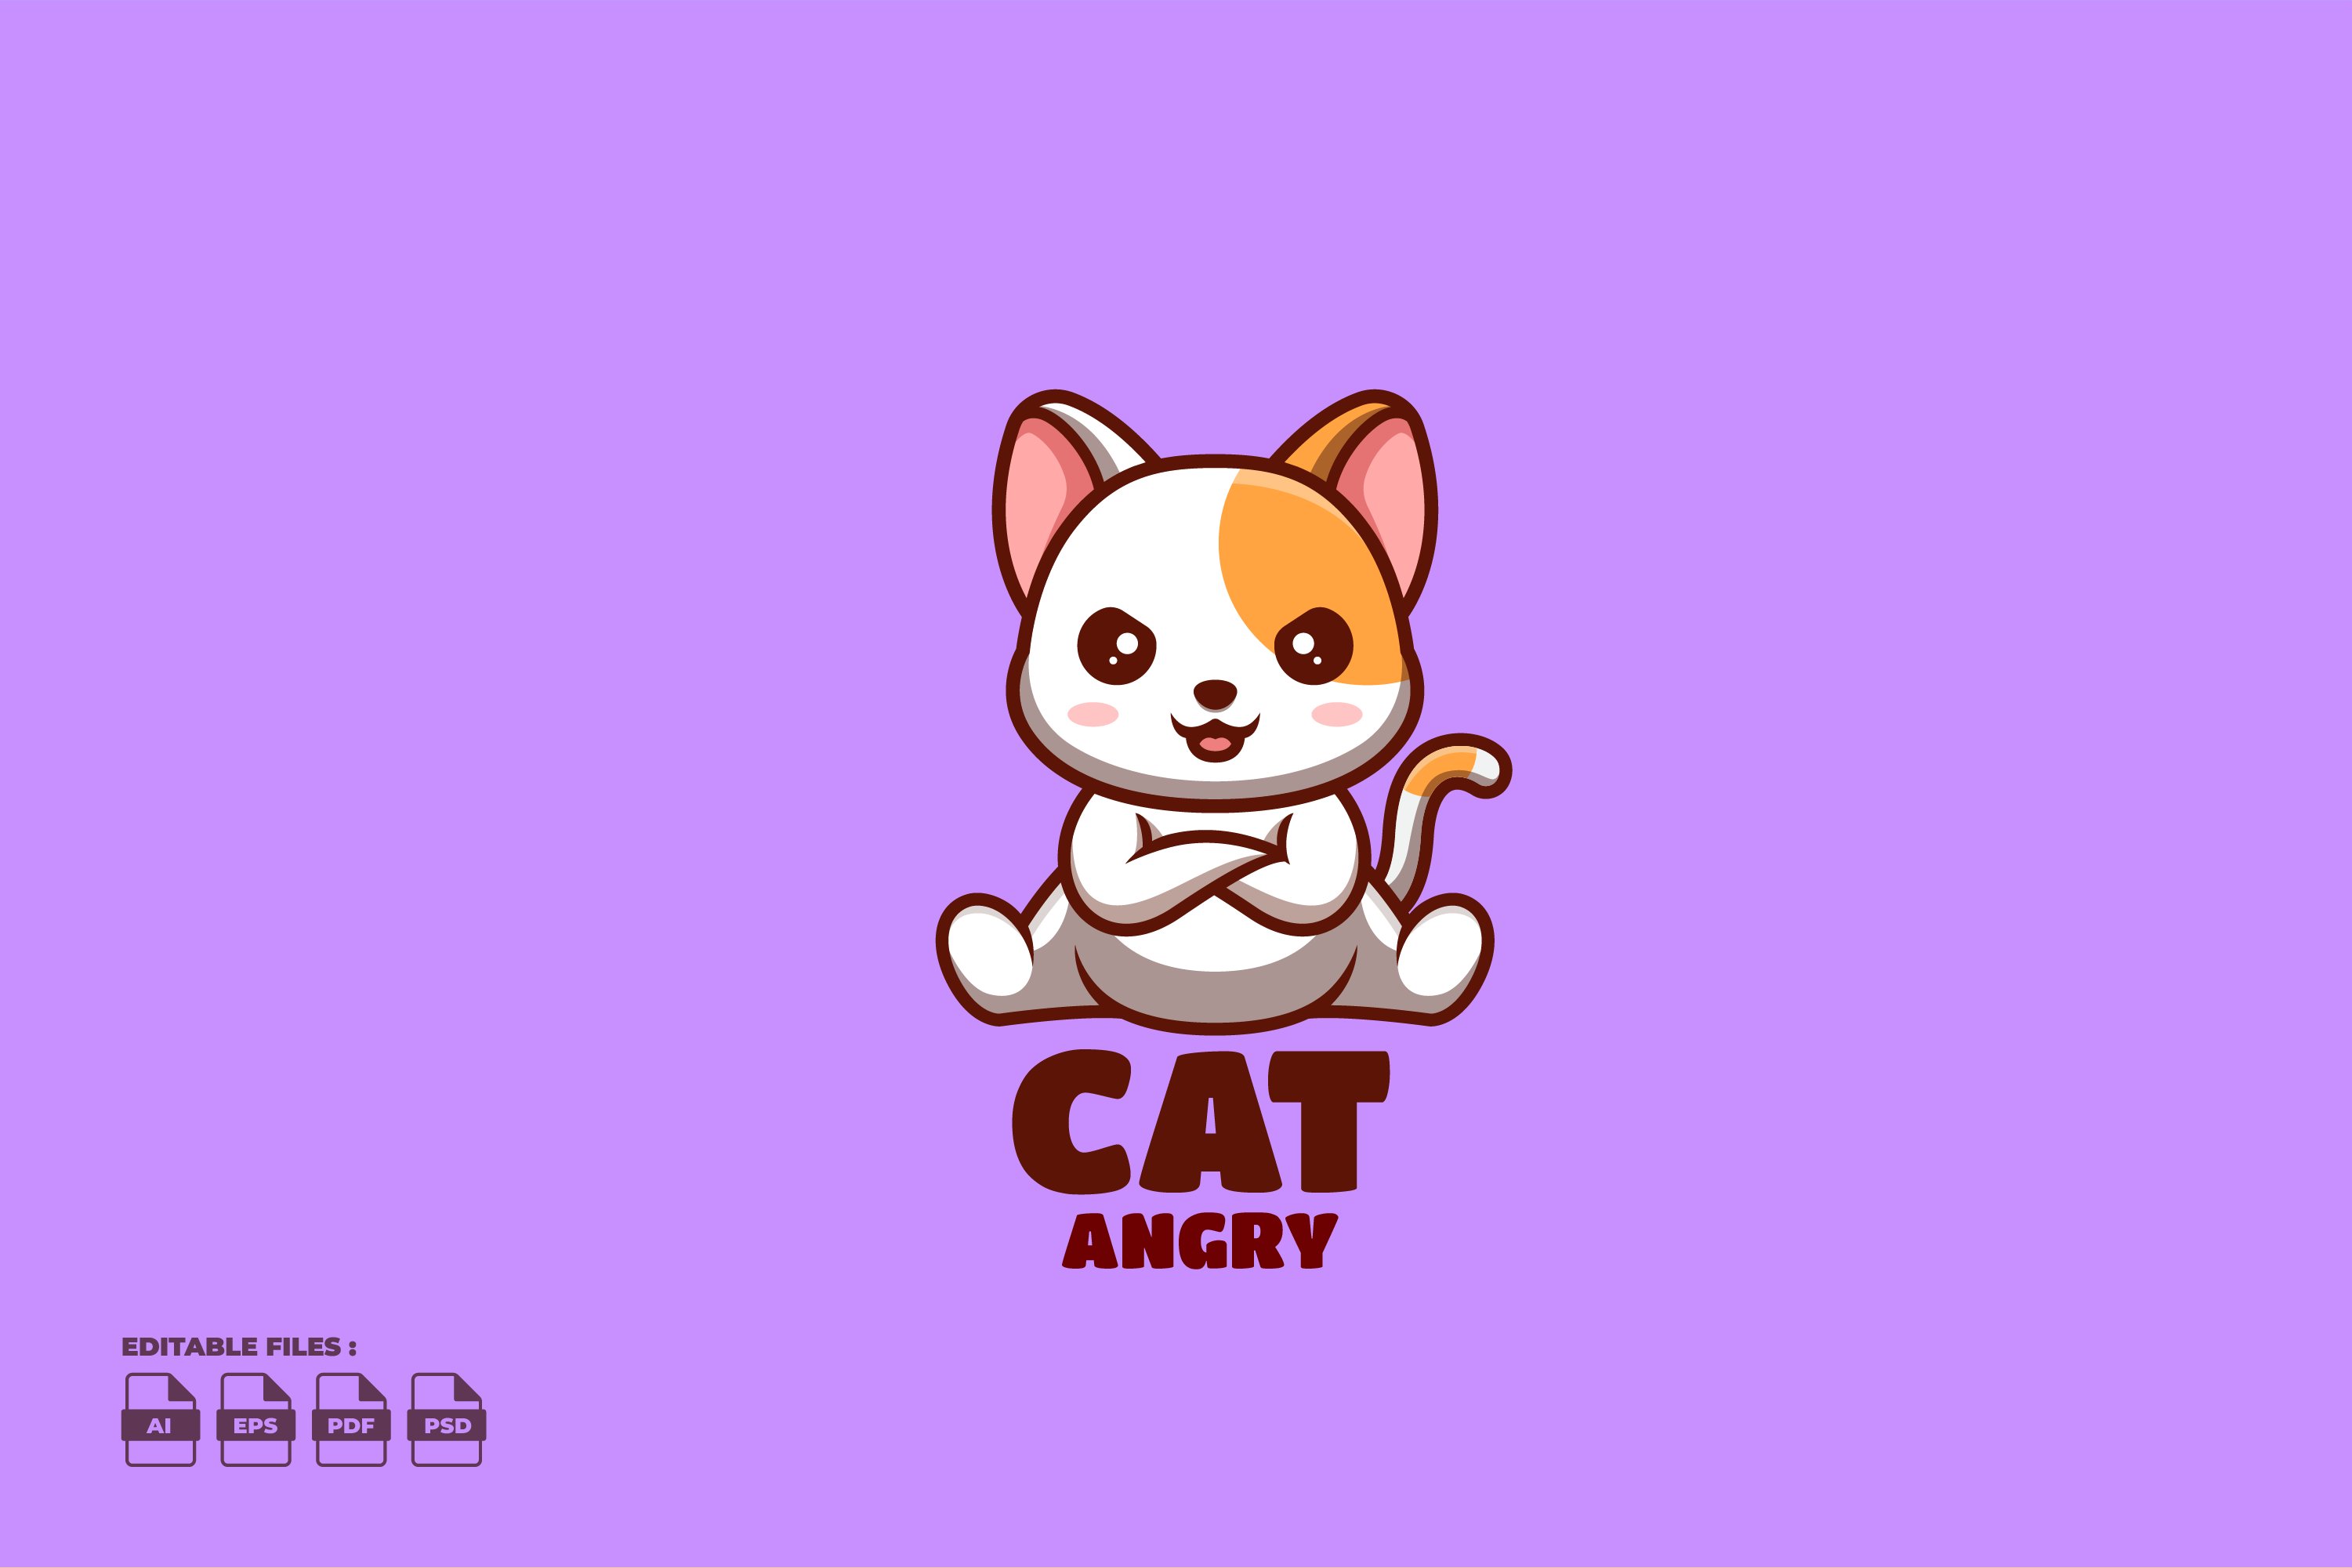 Angry White Cat Cute Mascot Logo cover image.